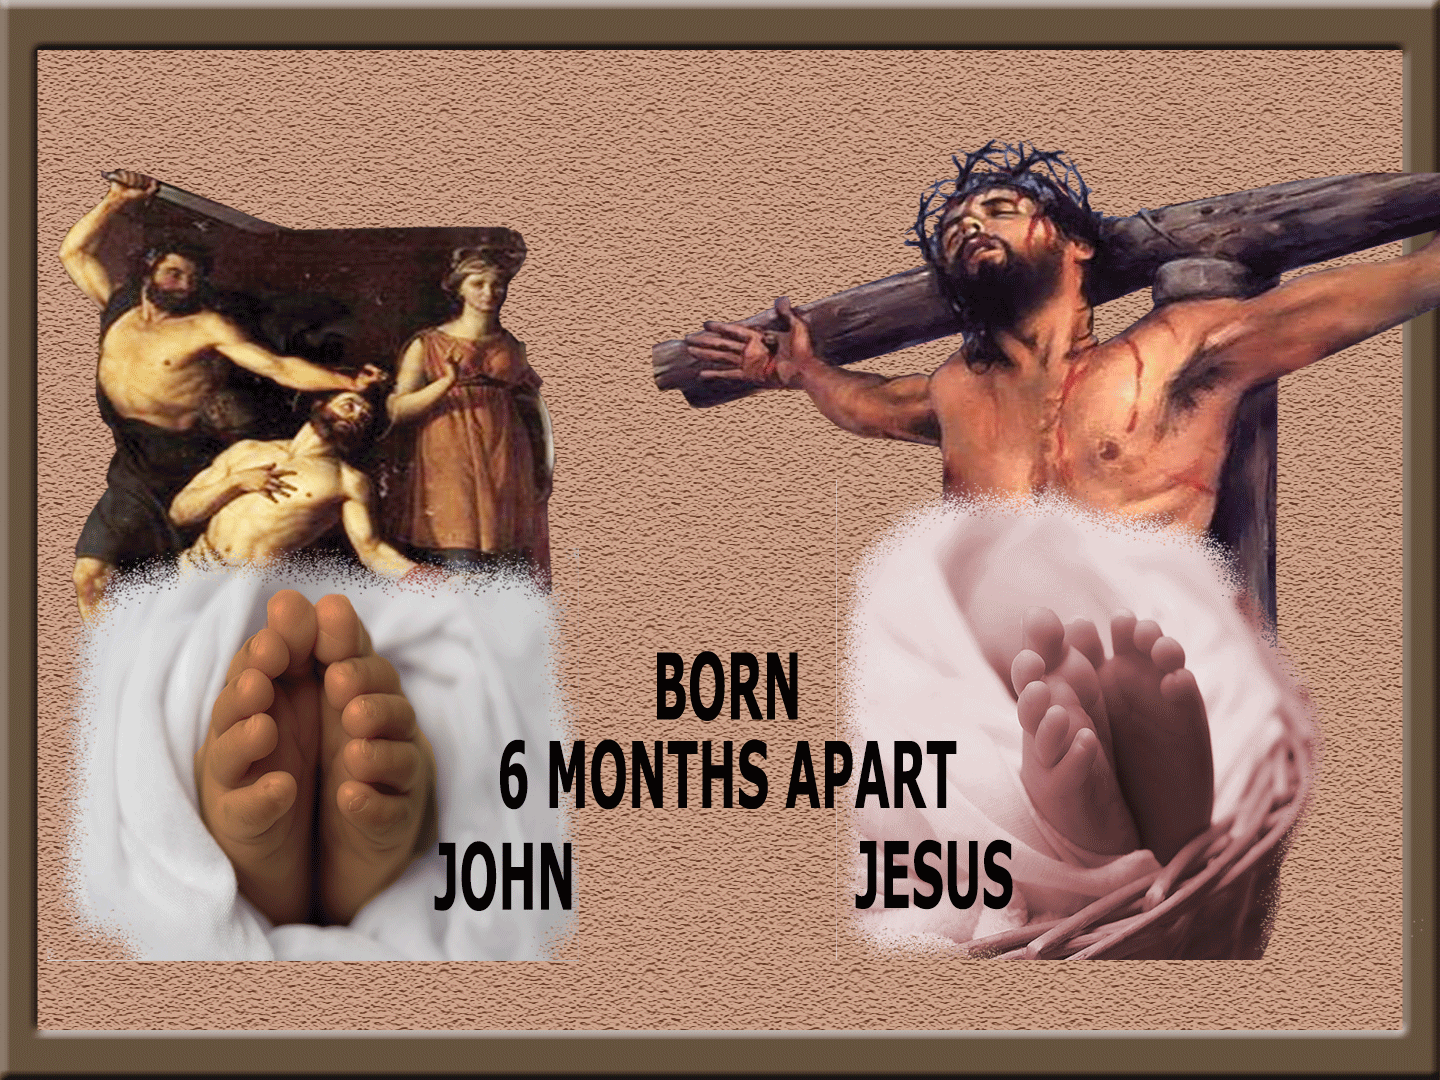 baby feet of John and Jesus born 6 months apart. Above them are death of John by beheading and Jesus on cross